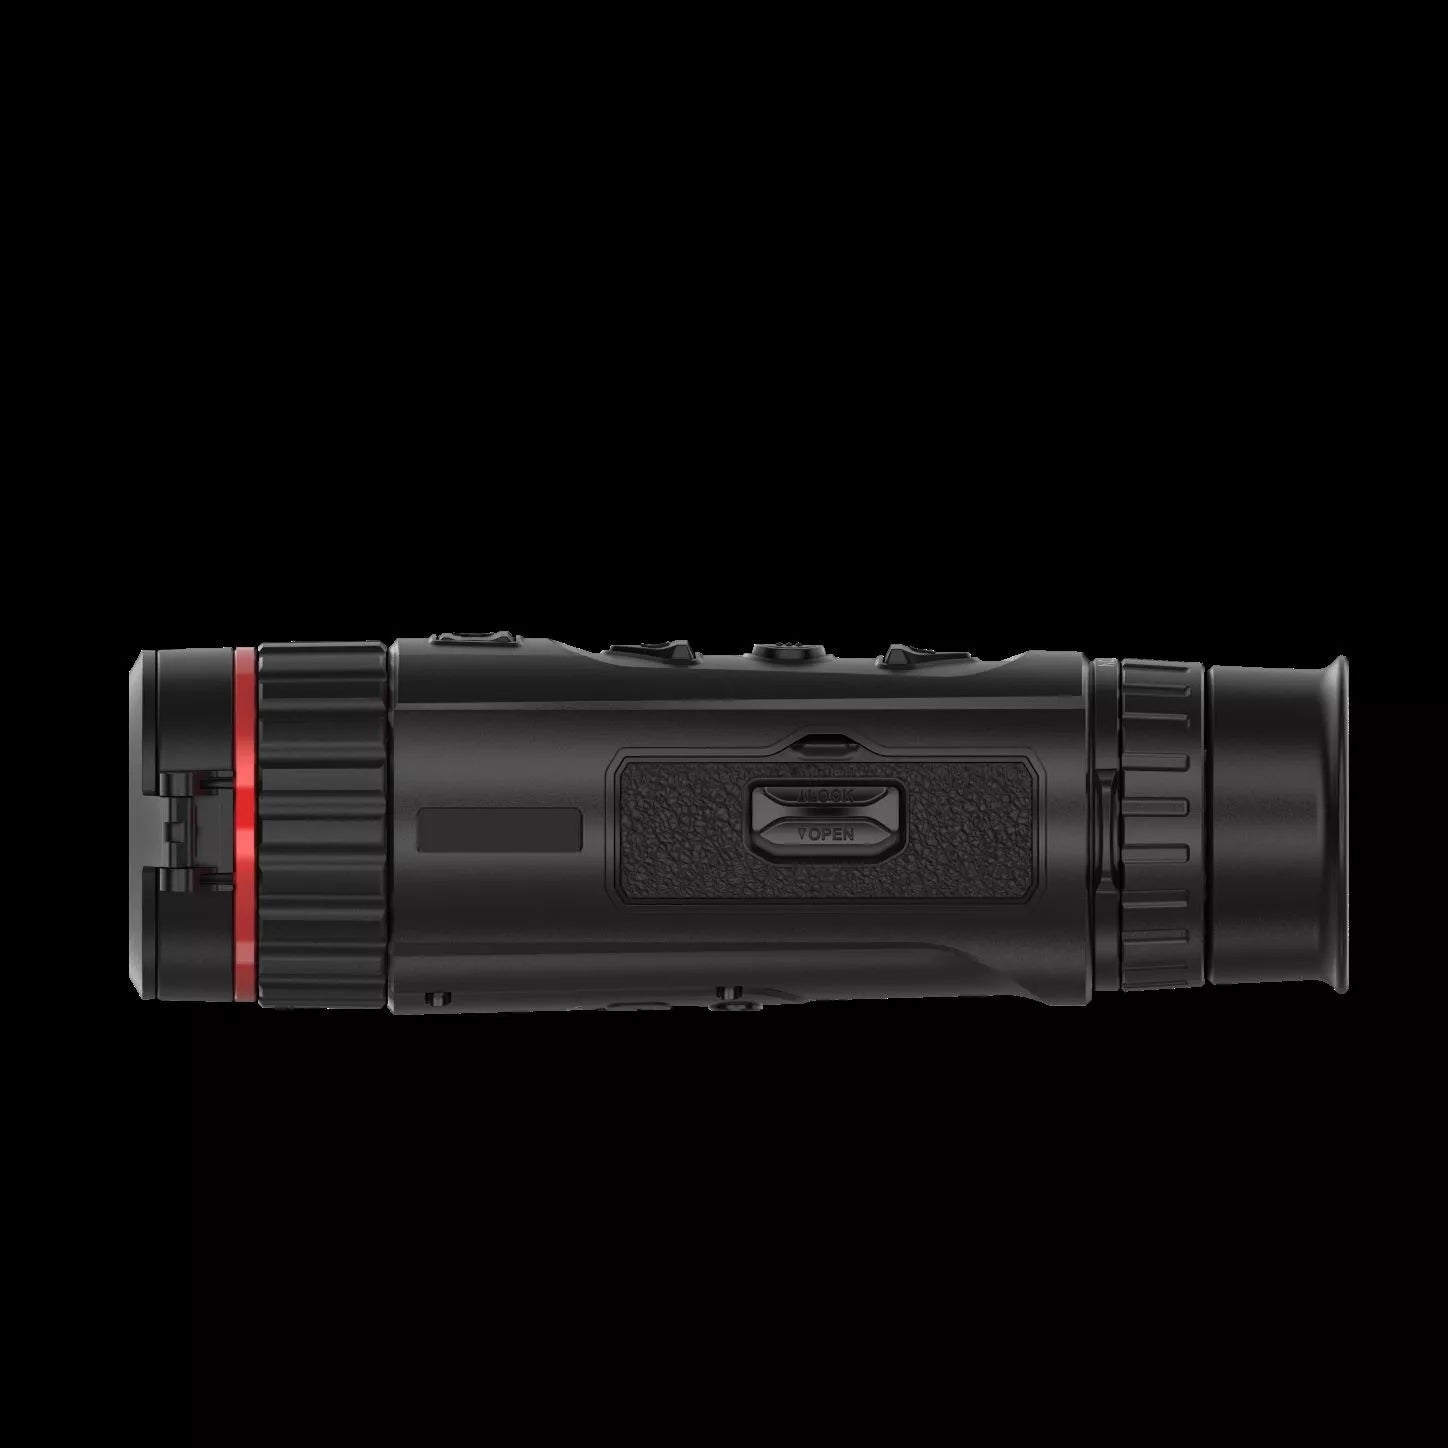 Hikmicro Falcon Pro FQ35 Hand Held Thermal Imager